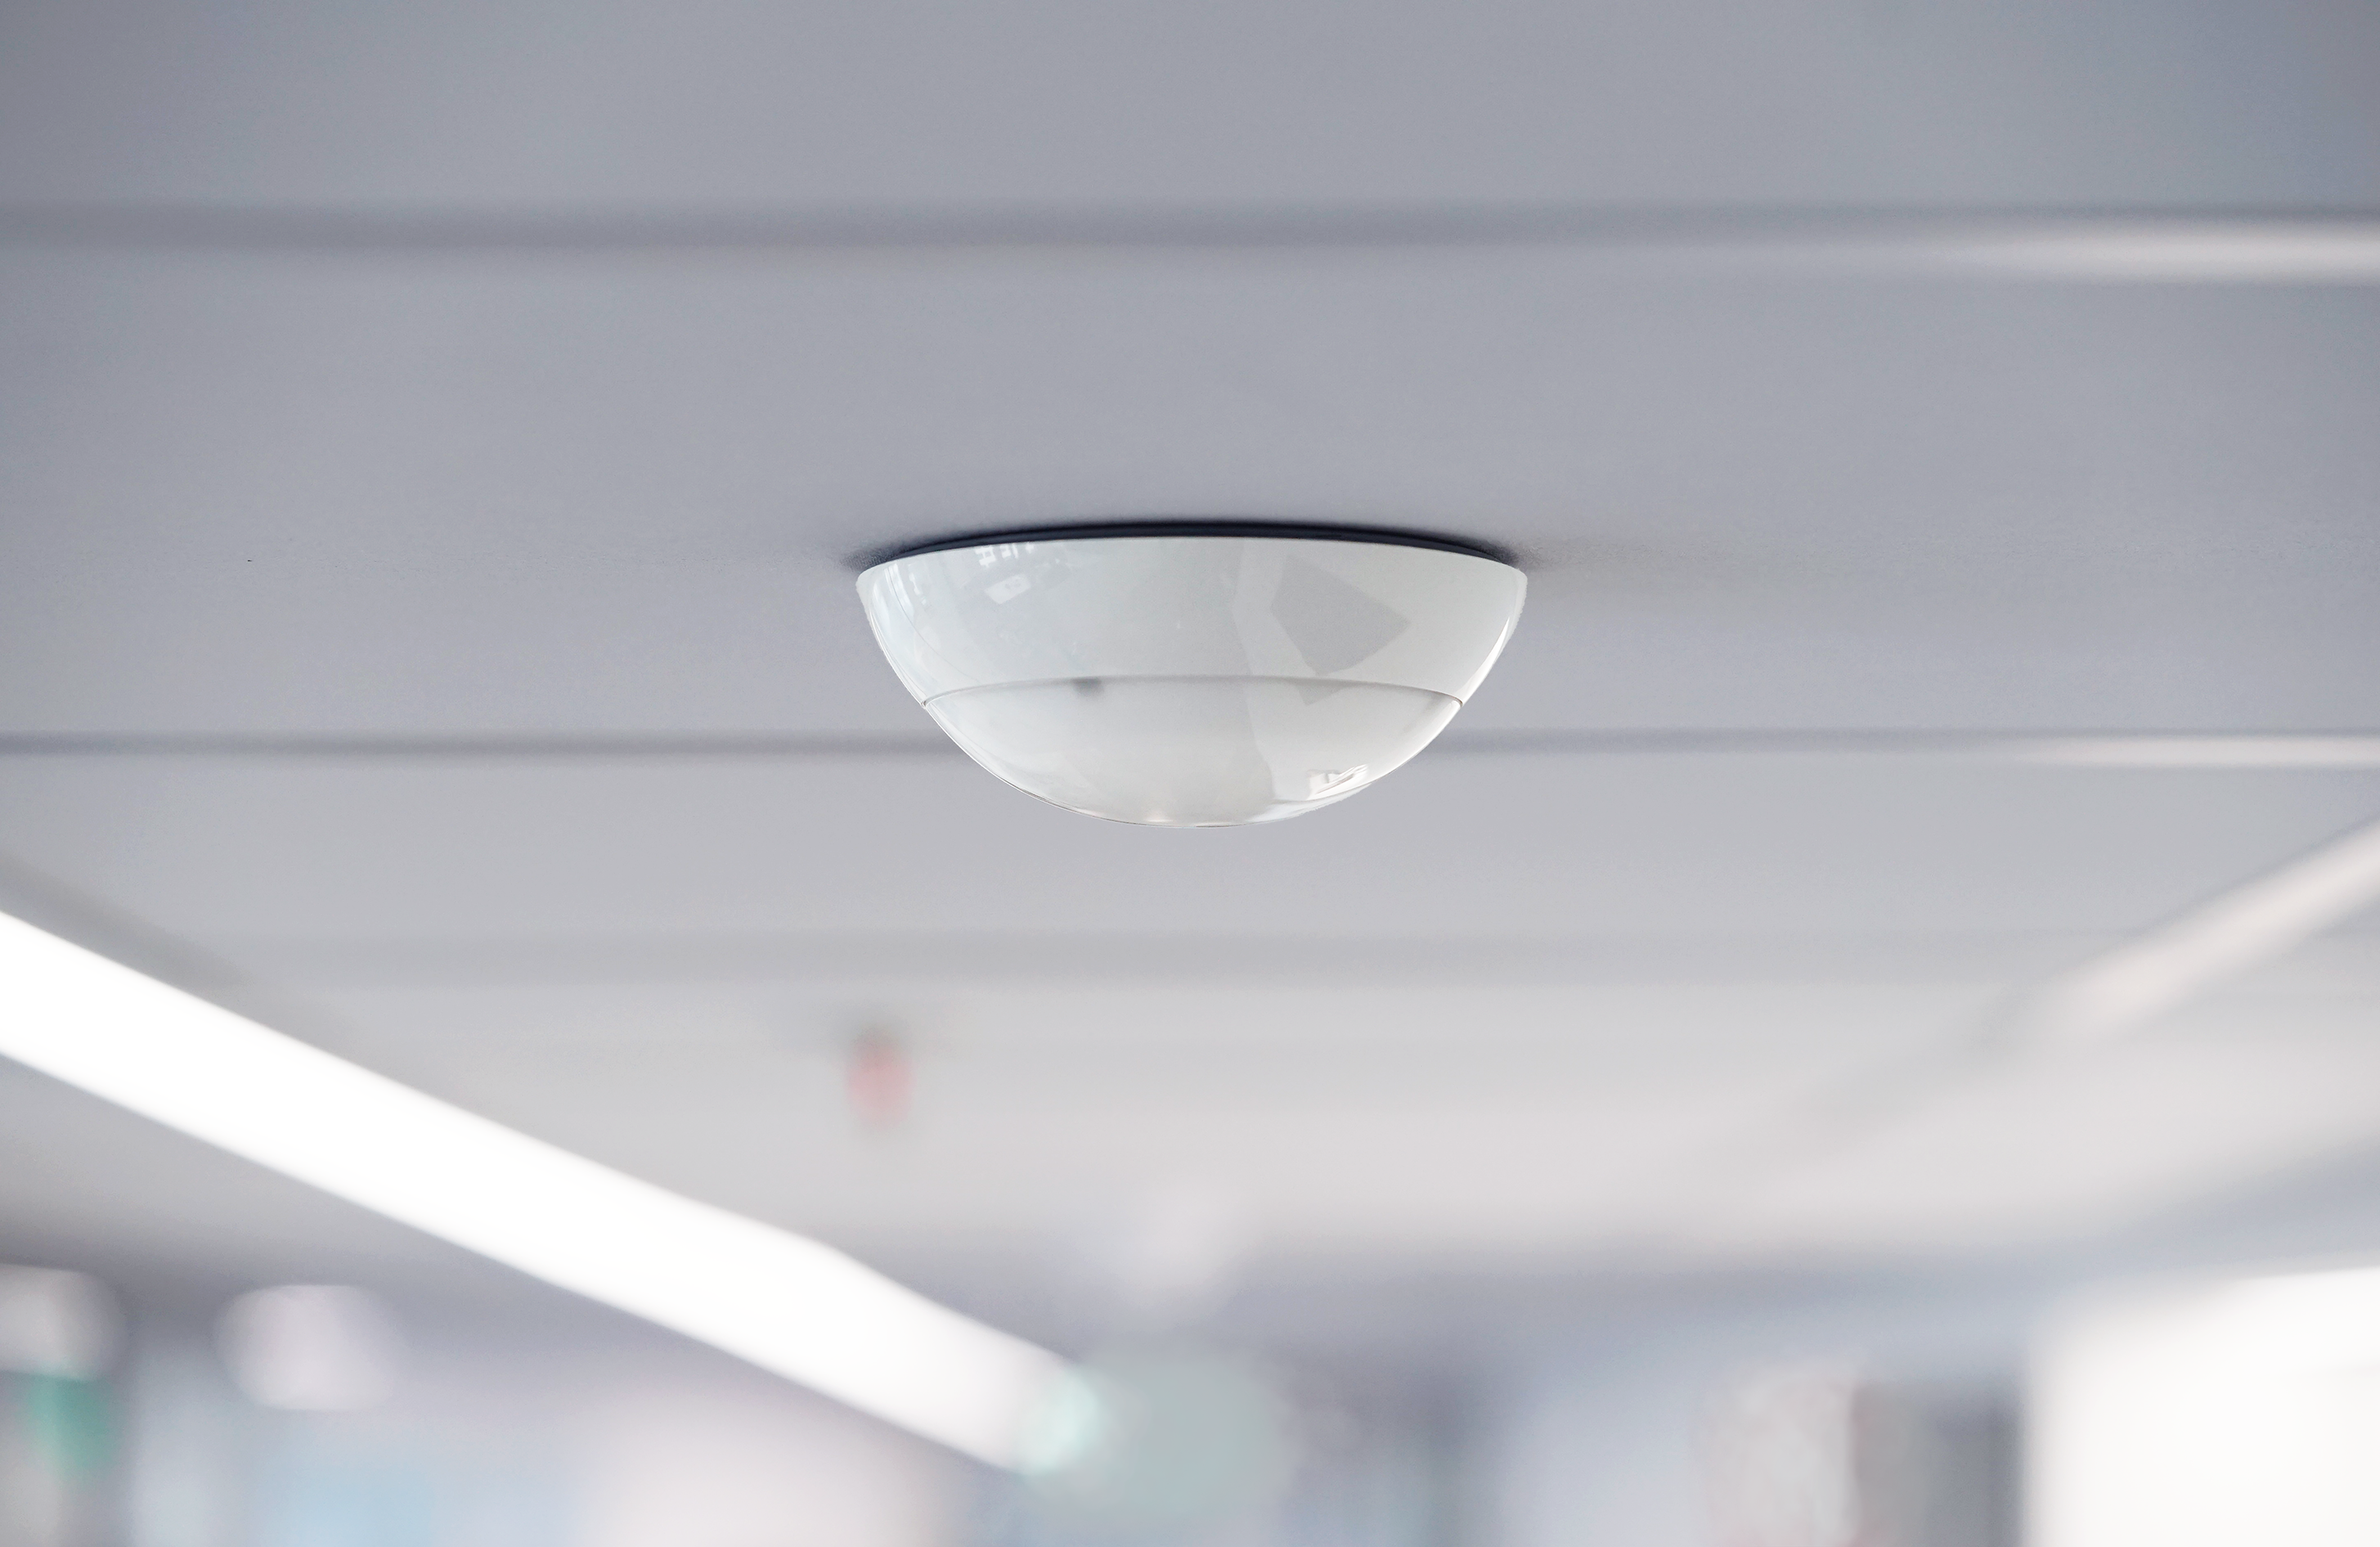 Residence Security Sensors – Which Kind Is Right For You?